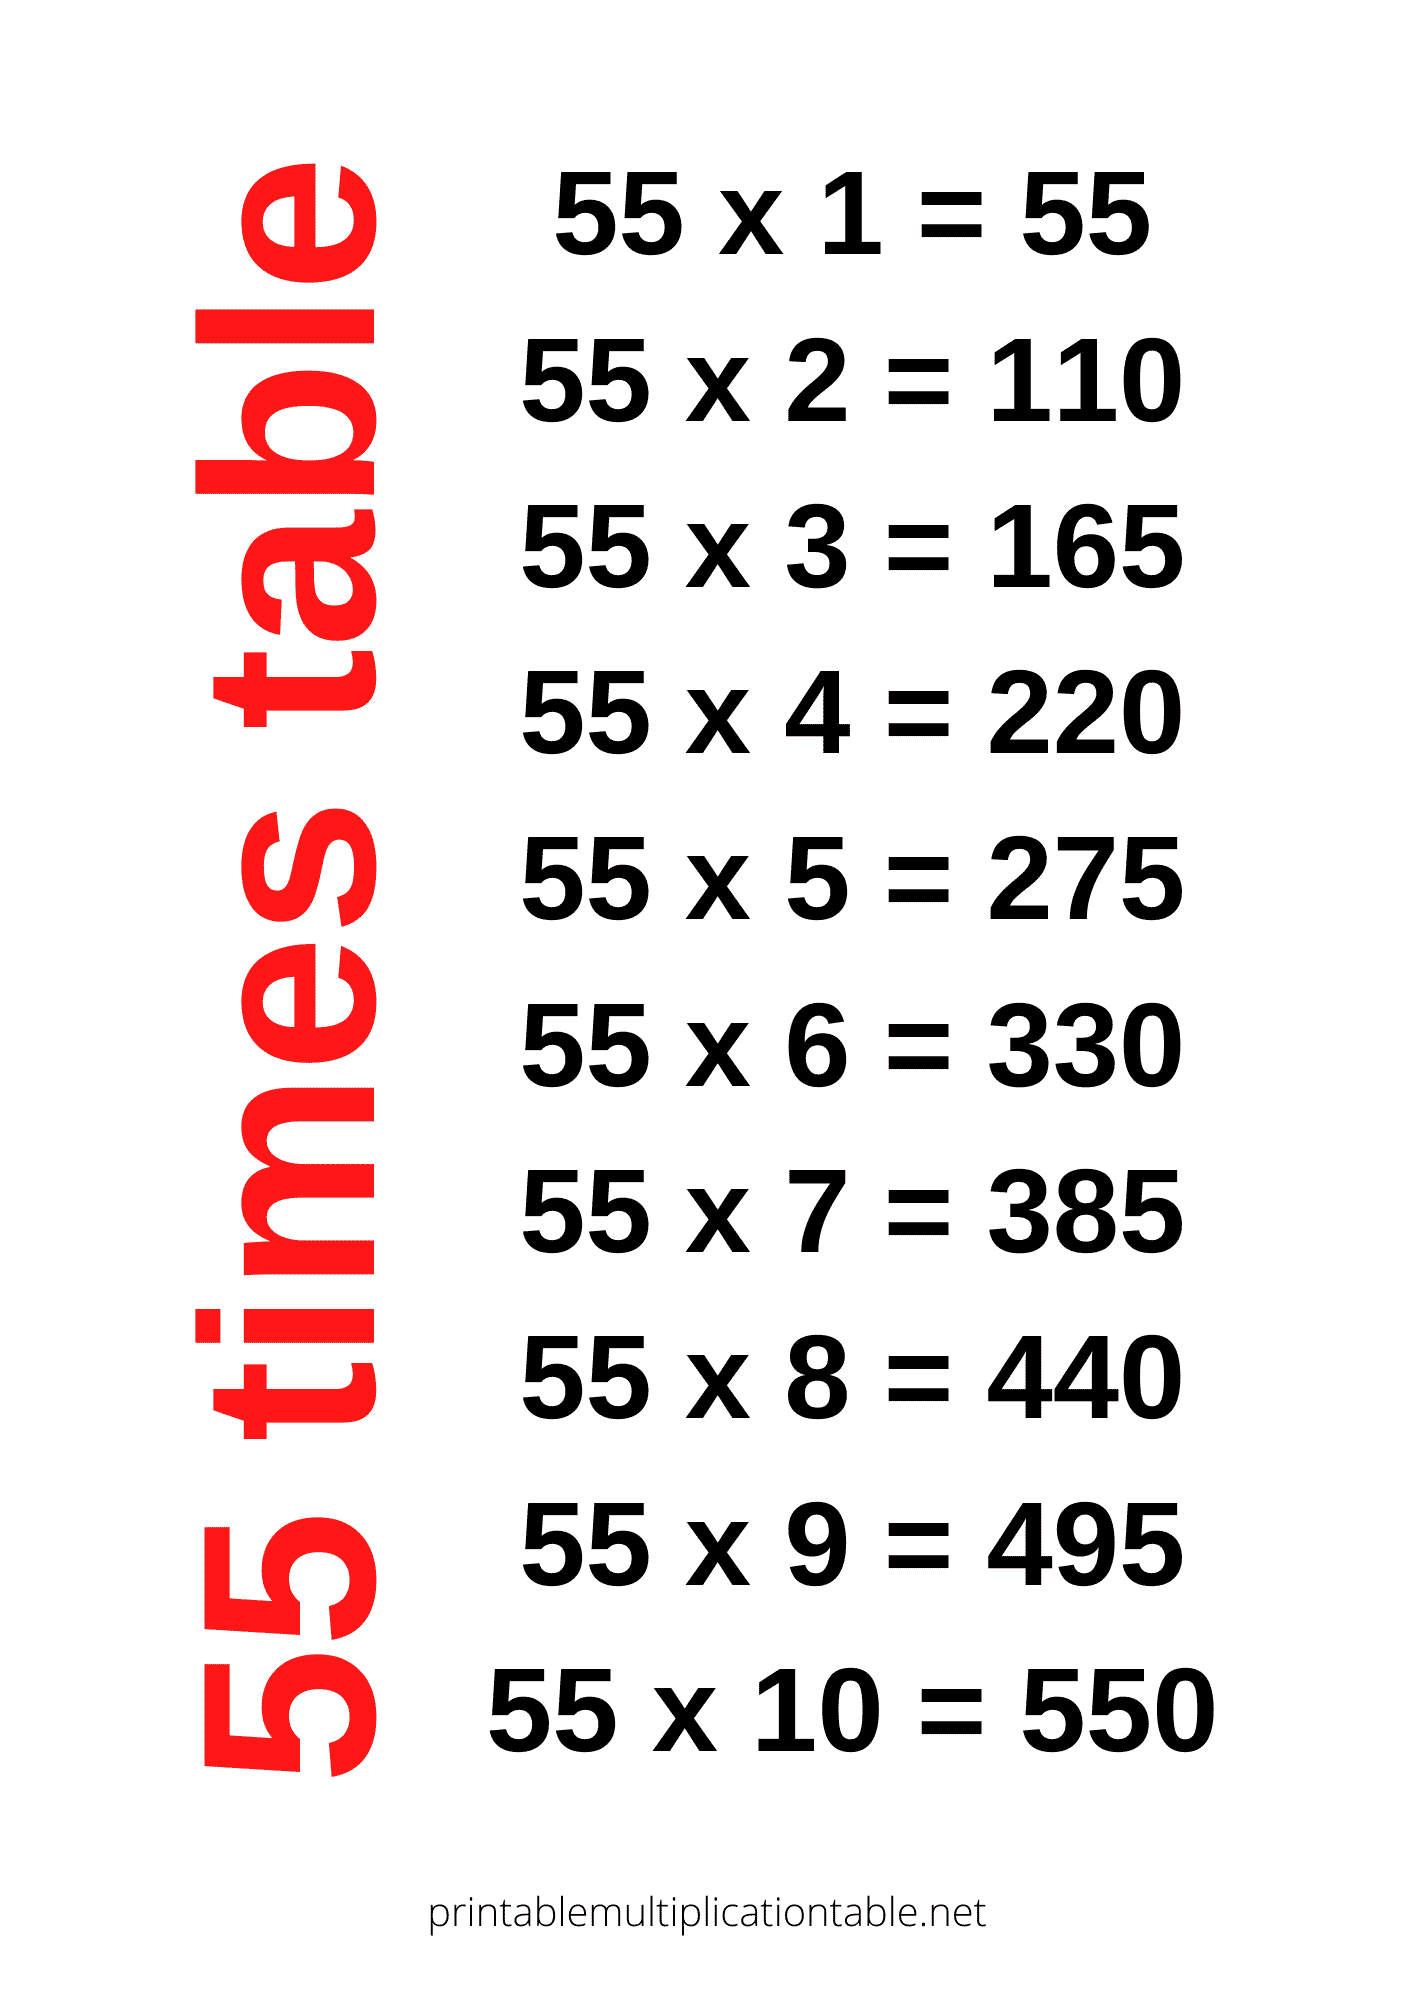 55 times table chart